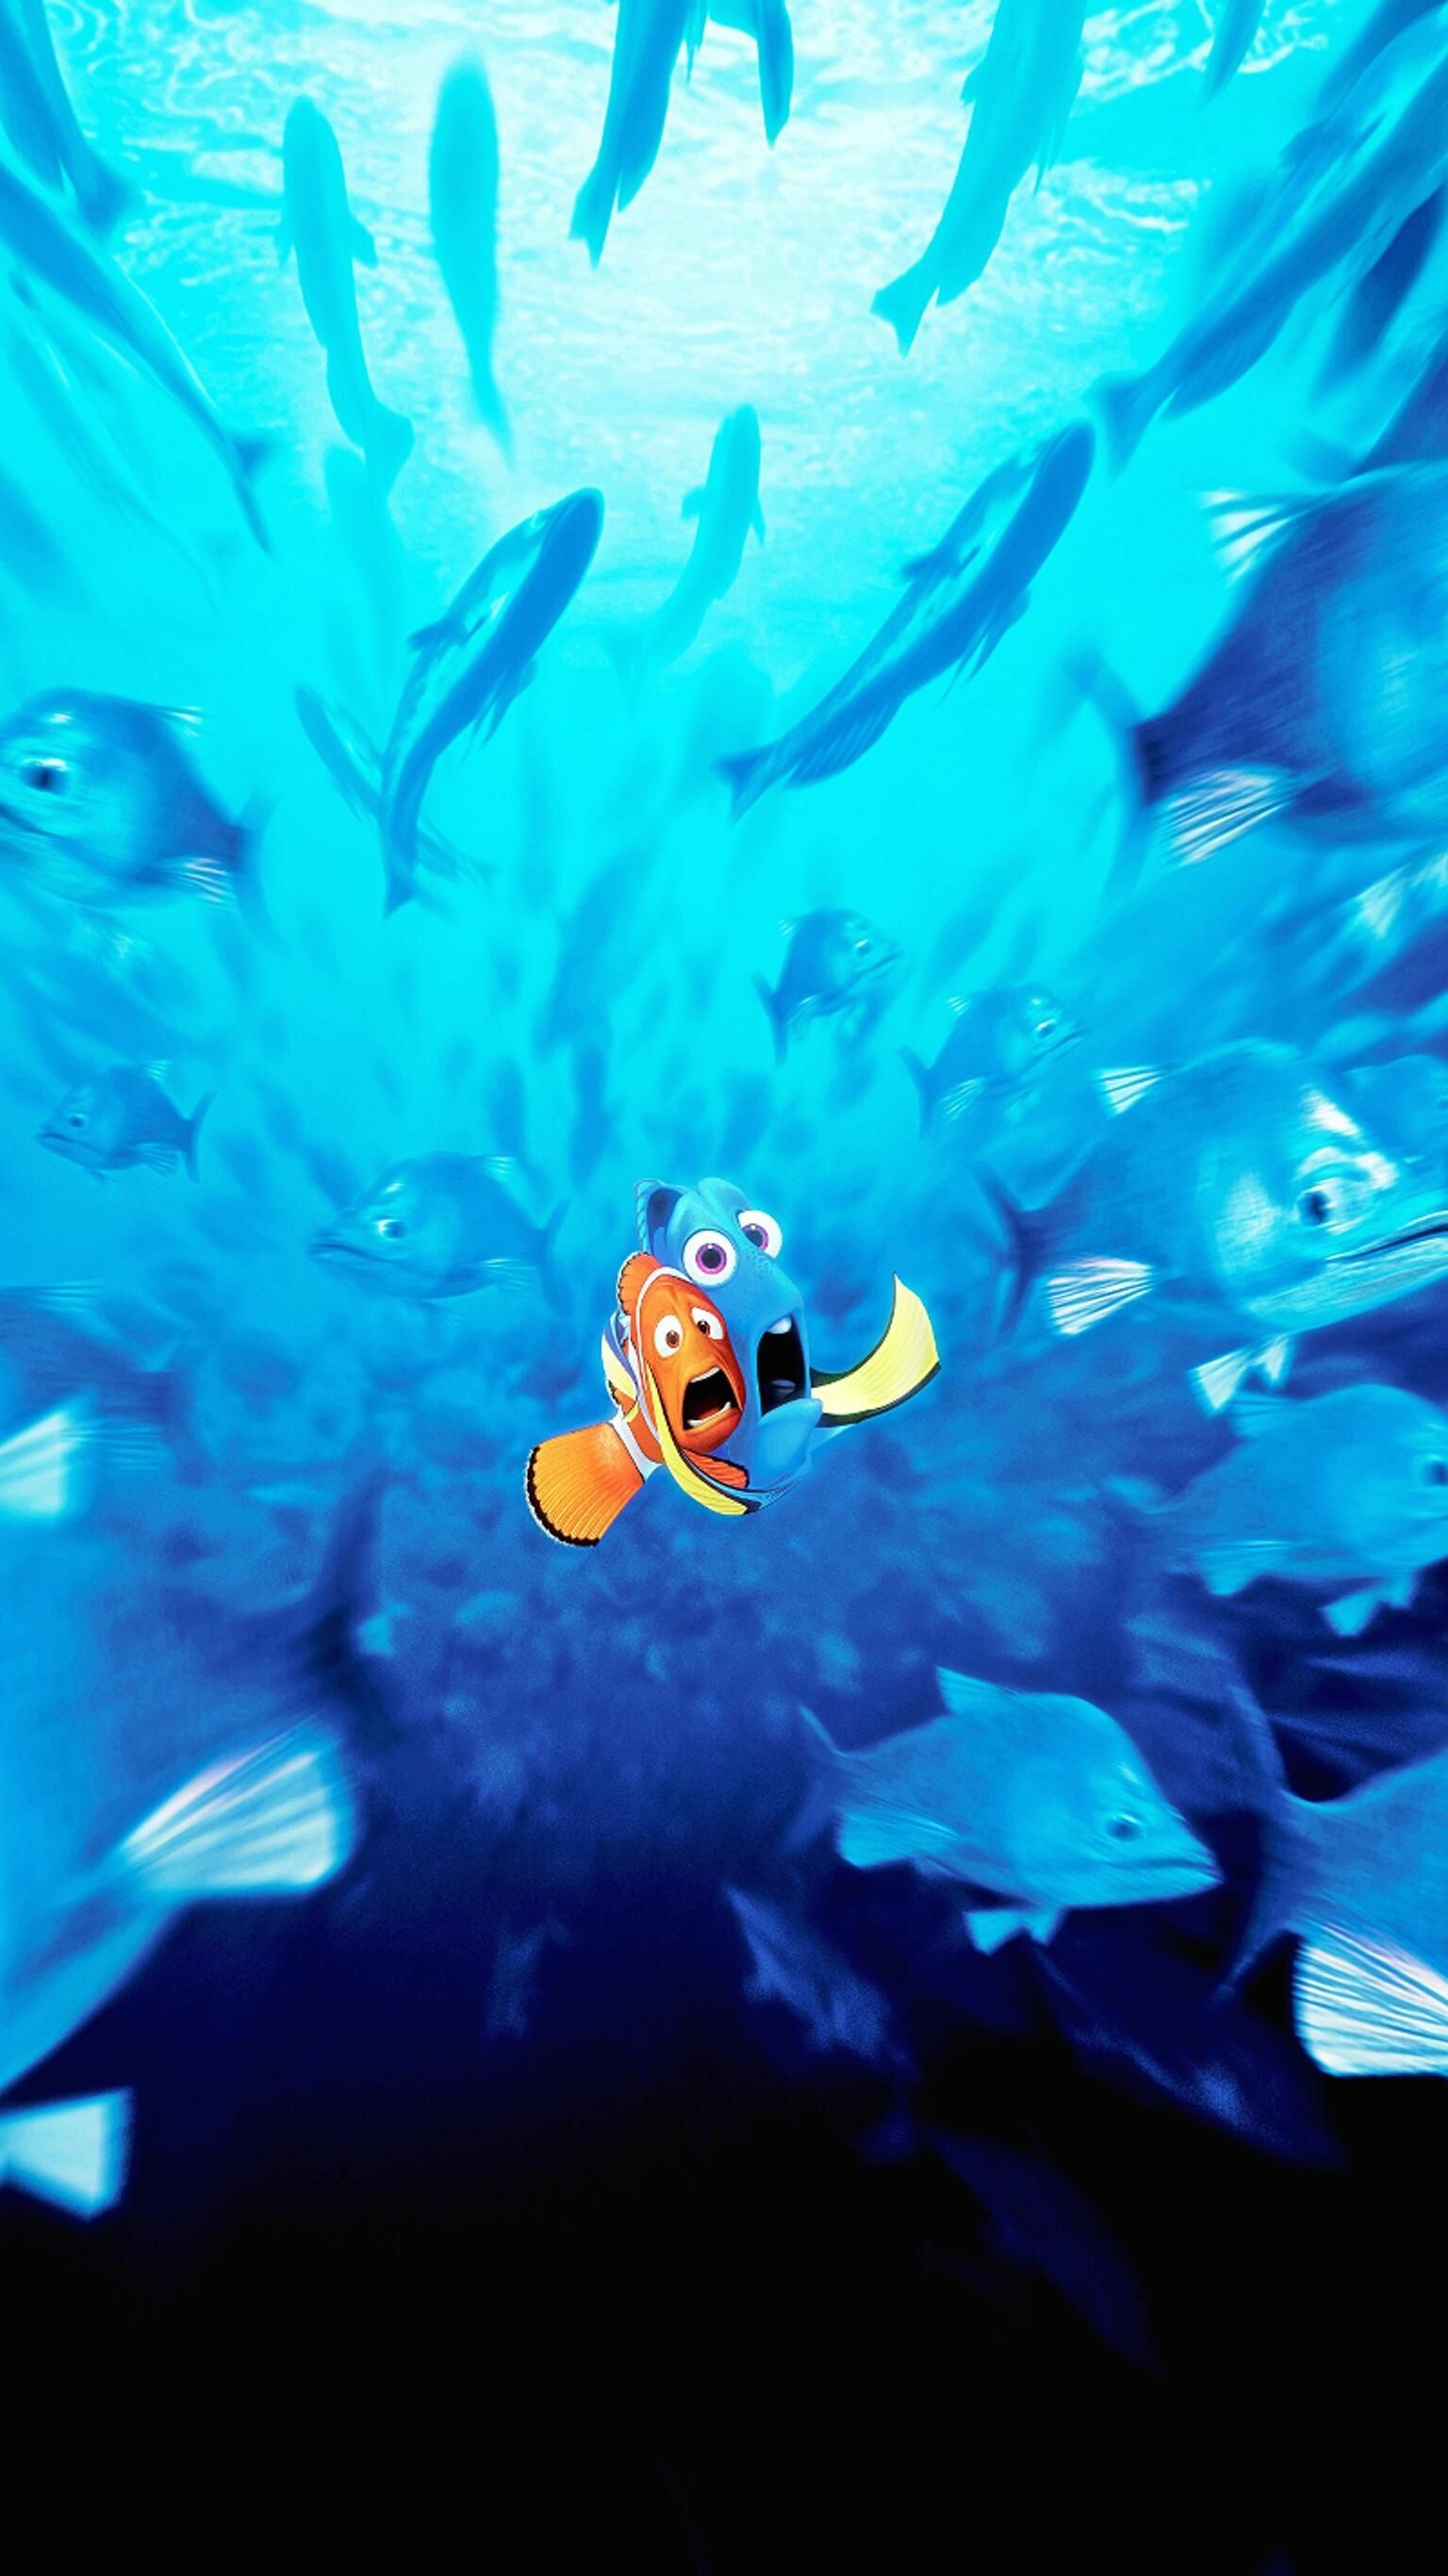 Finding Dory: It was released in theaters on June 17, 2016, and celebrates Pixar's 30th anniversary. 1540x2740 HD Wallpaper.